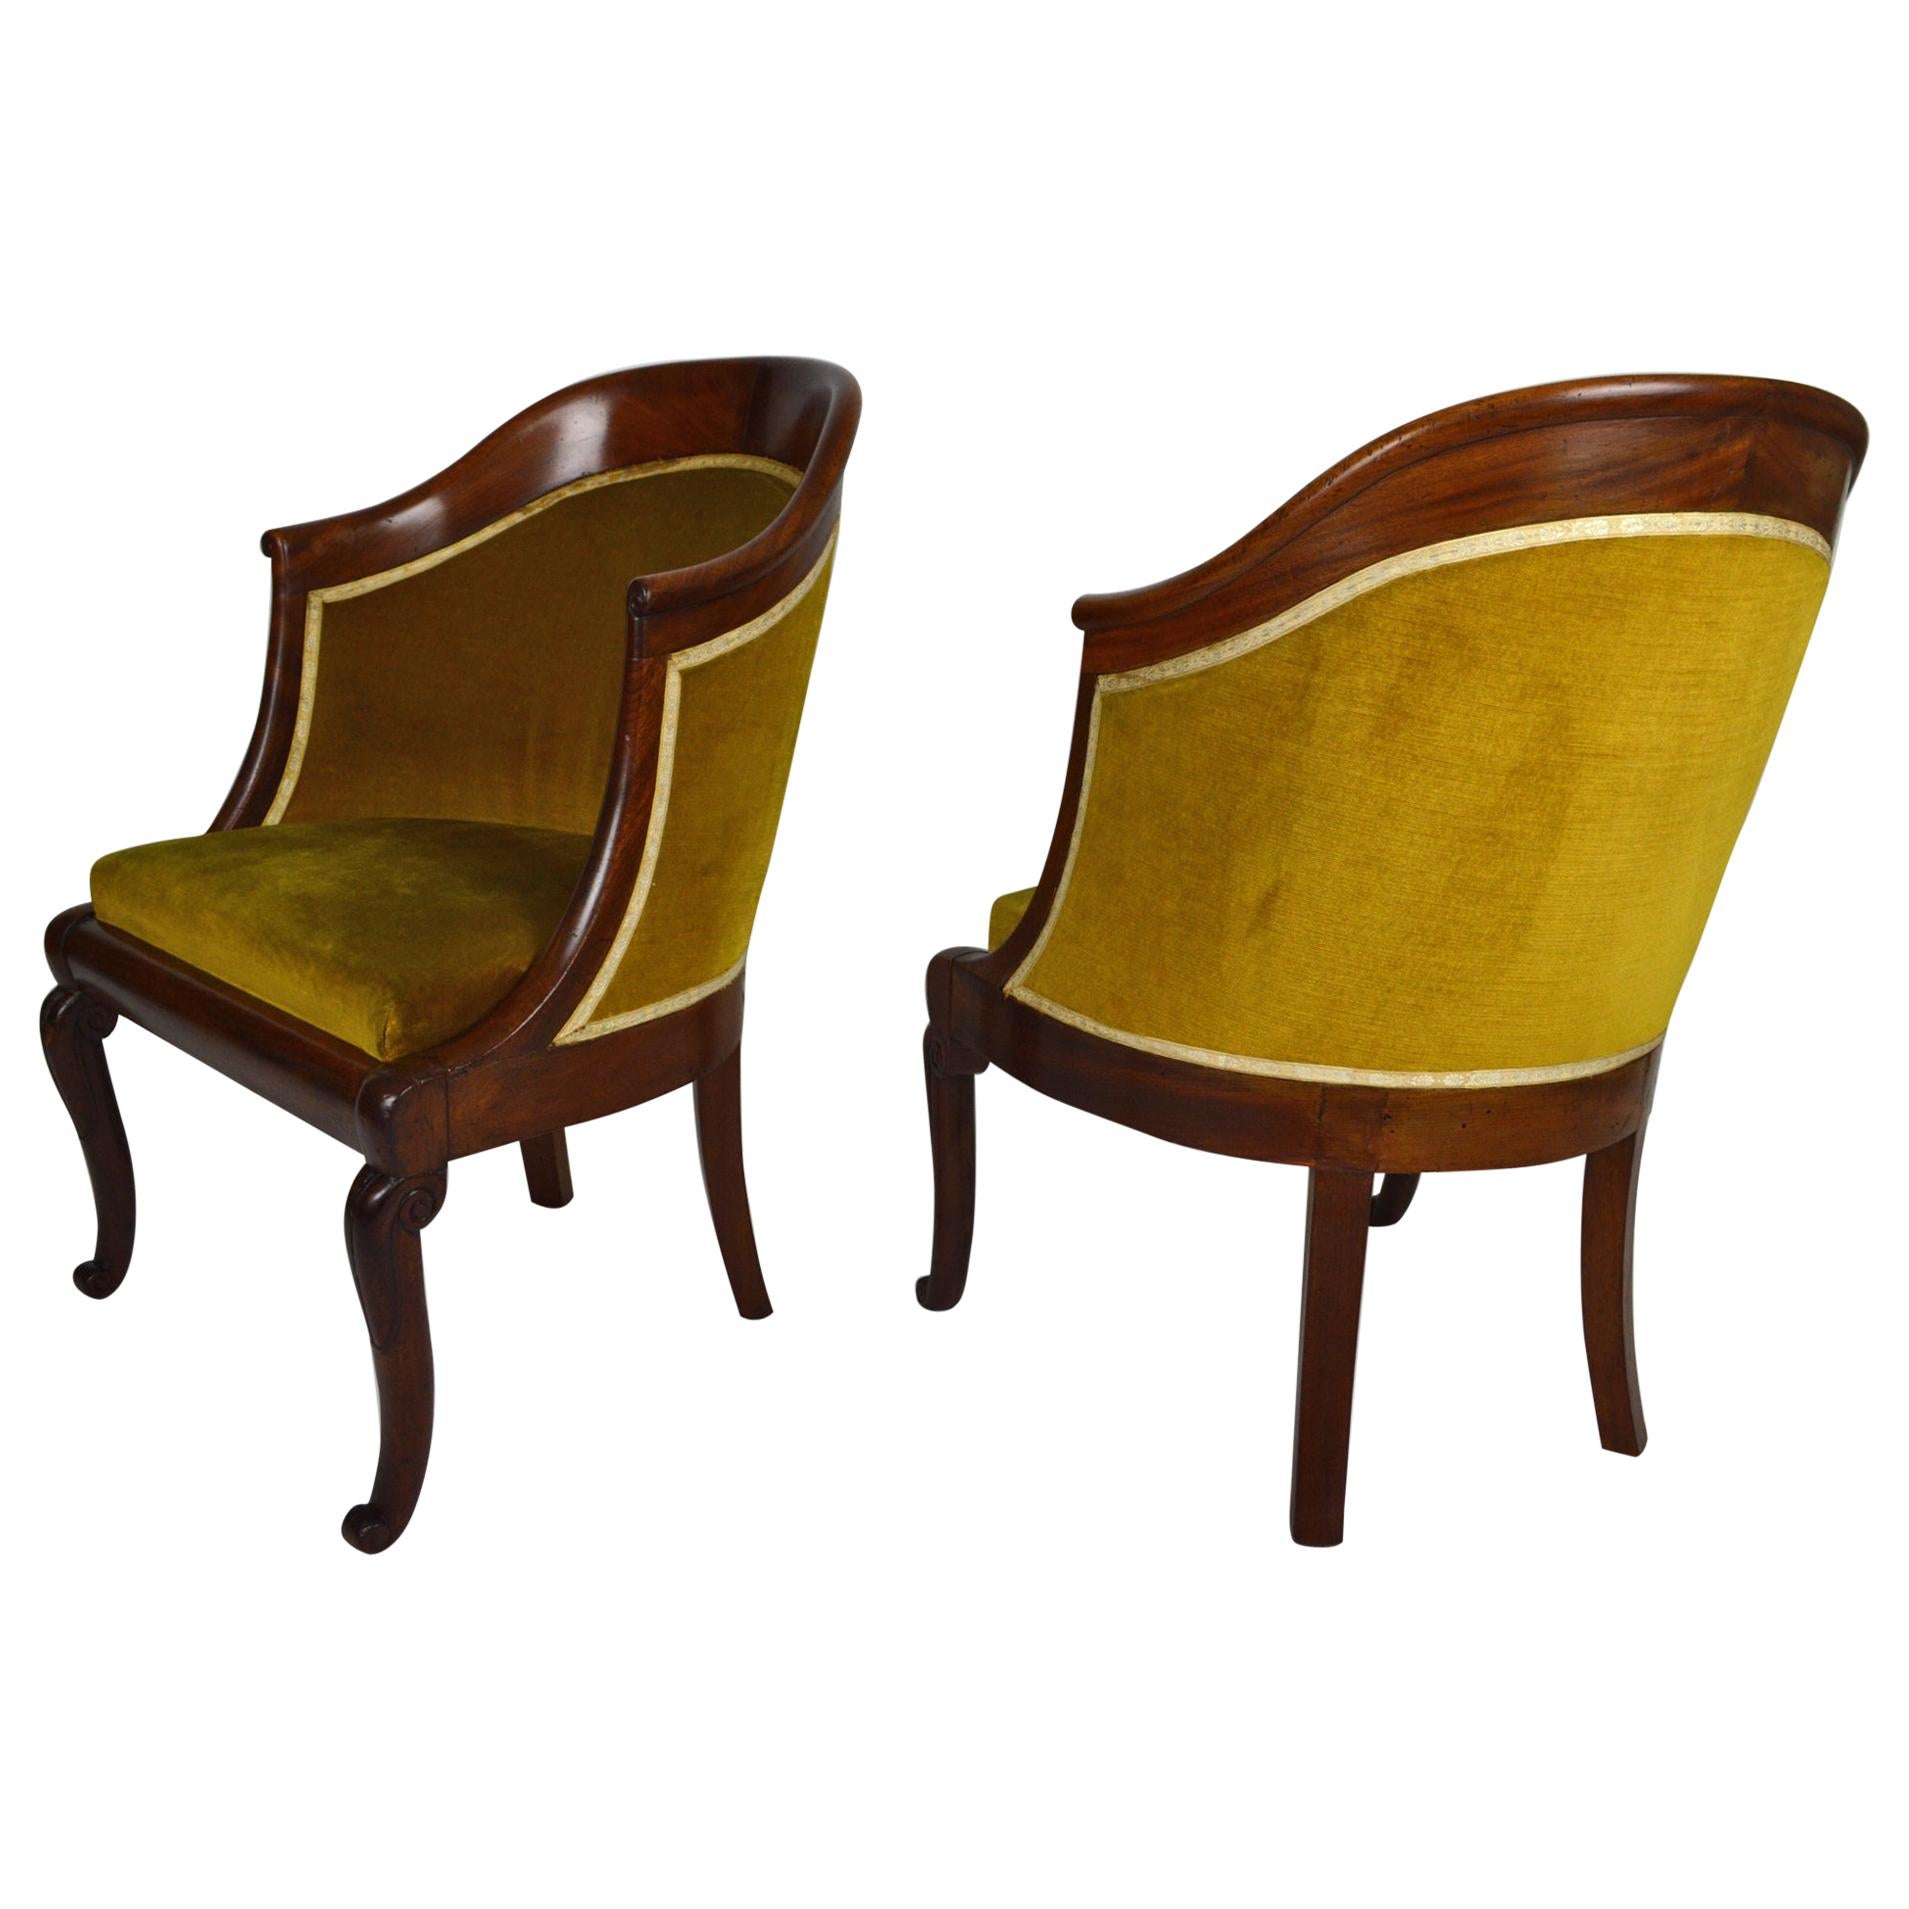 Pair of Armchairs / Tub Chairs in Carved Mahogany, France, Early 19th Century For Sale